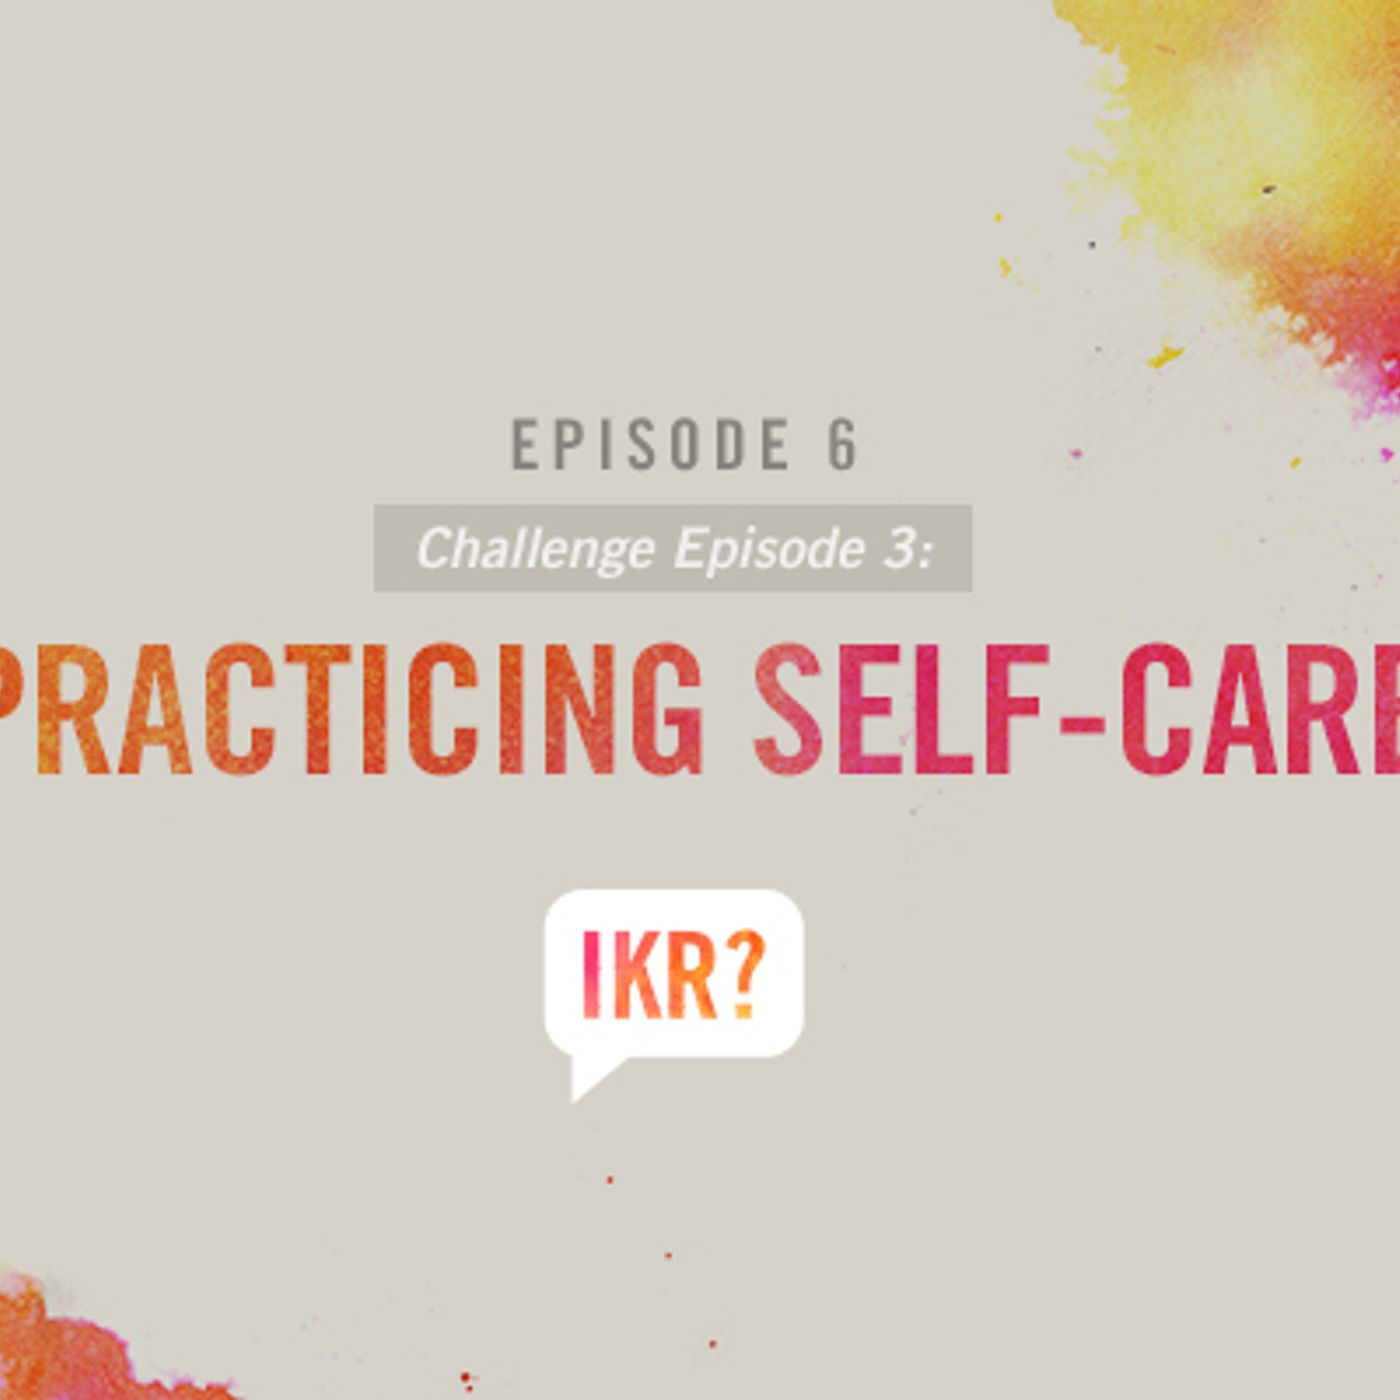 Challenge Episode 3: Practicing Self-Care